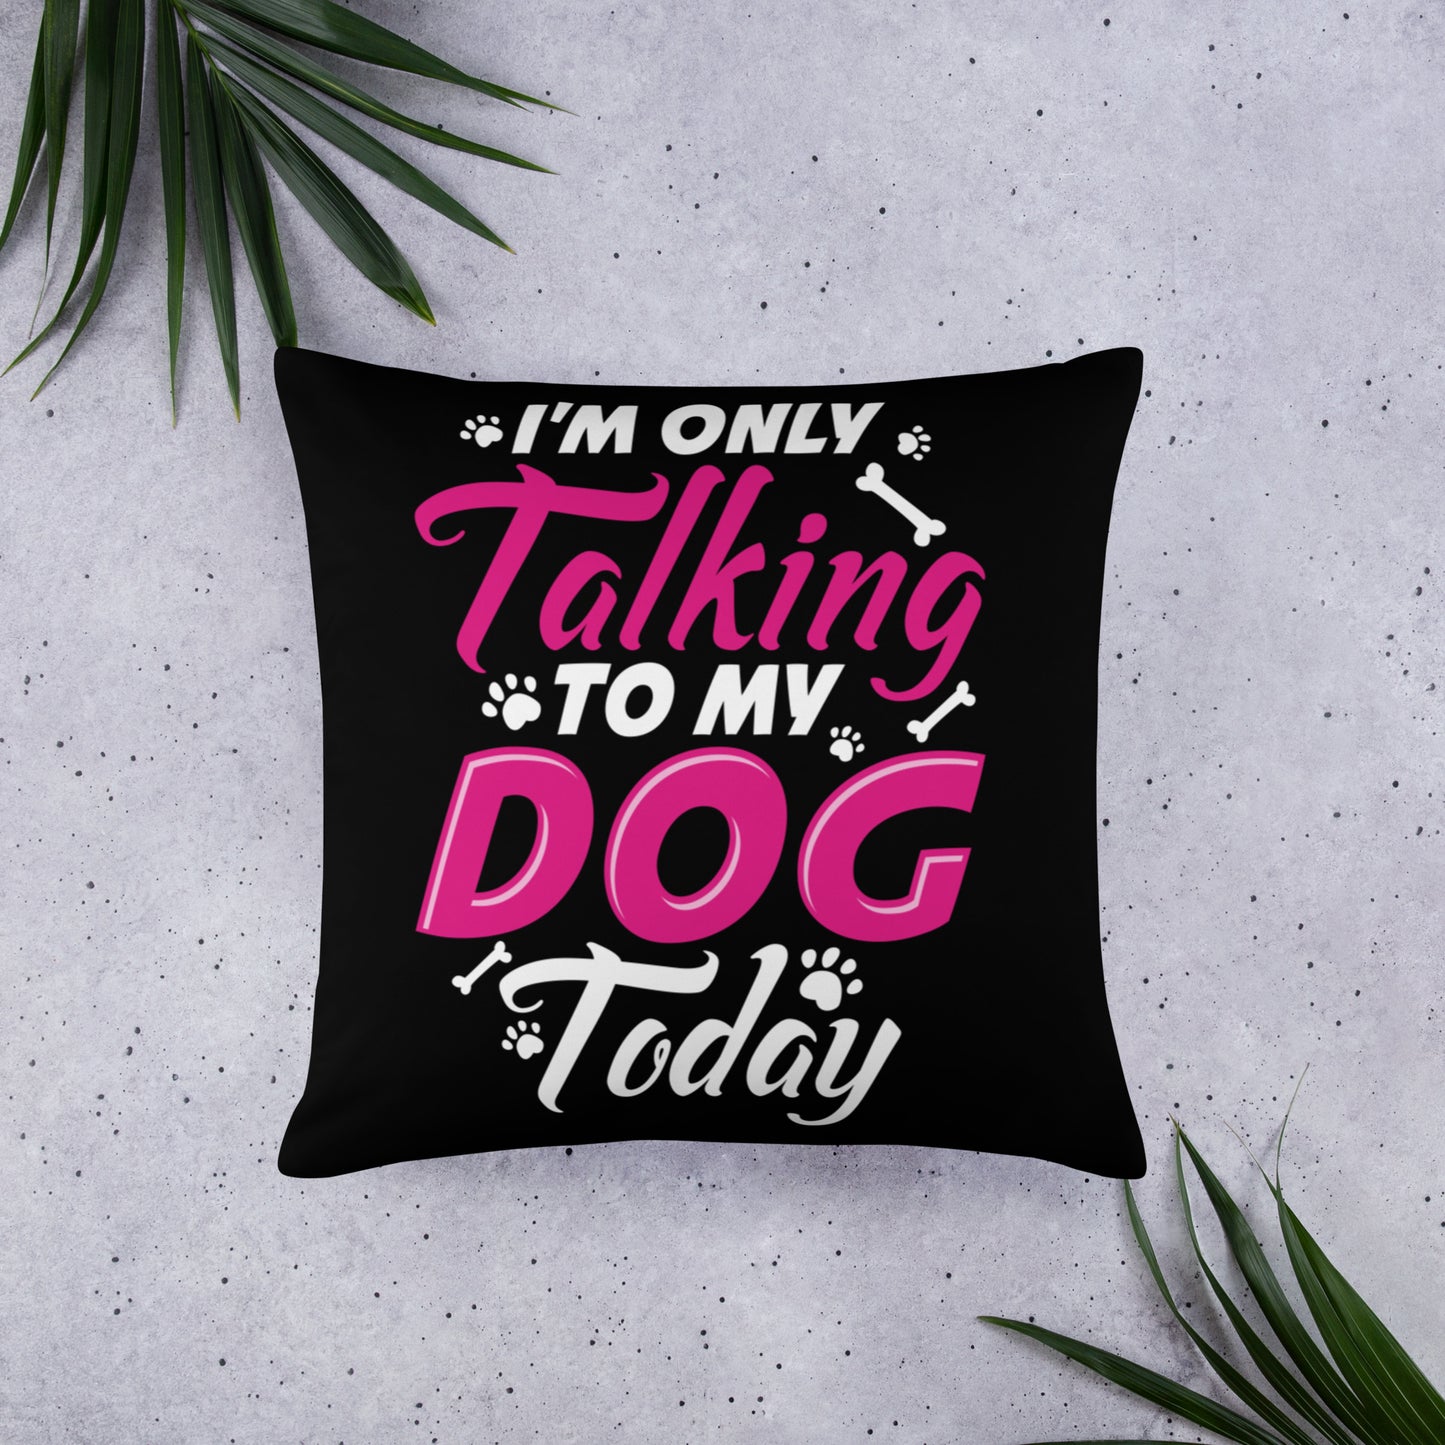 I'm Only Talking to my Dog Today Throw Pillow